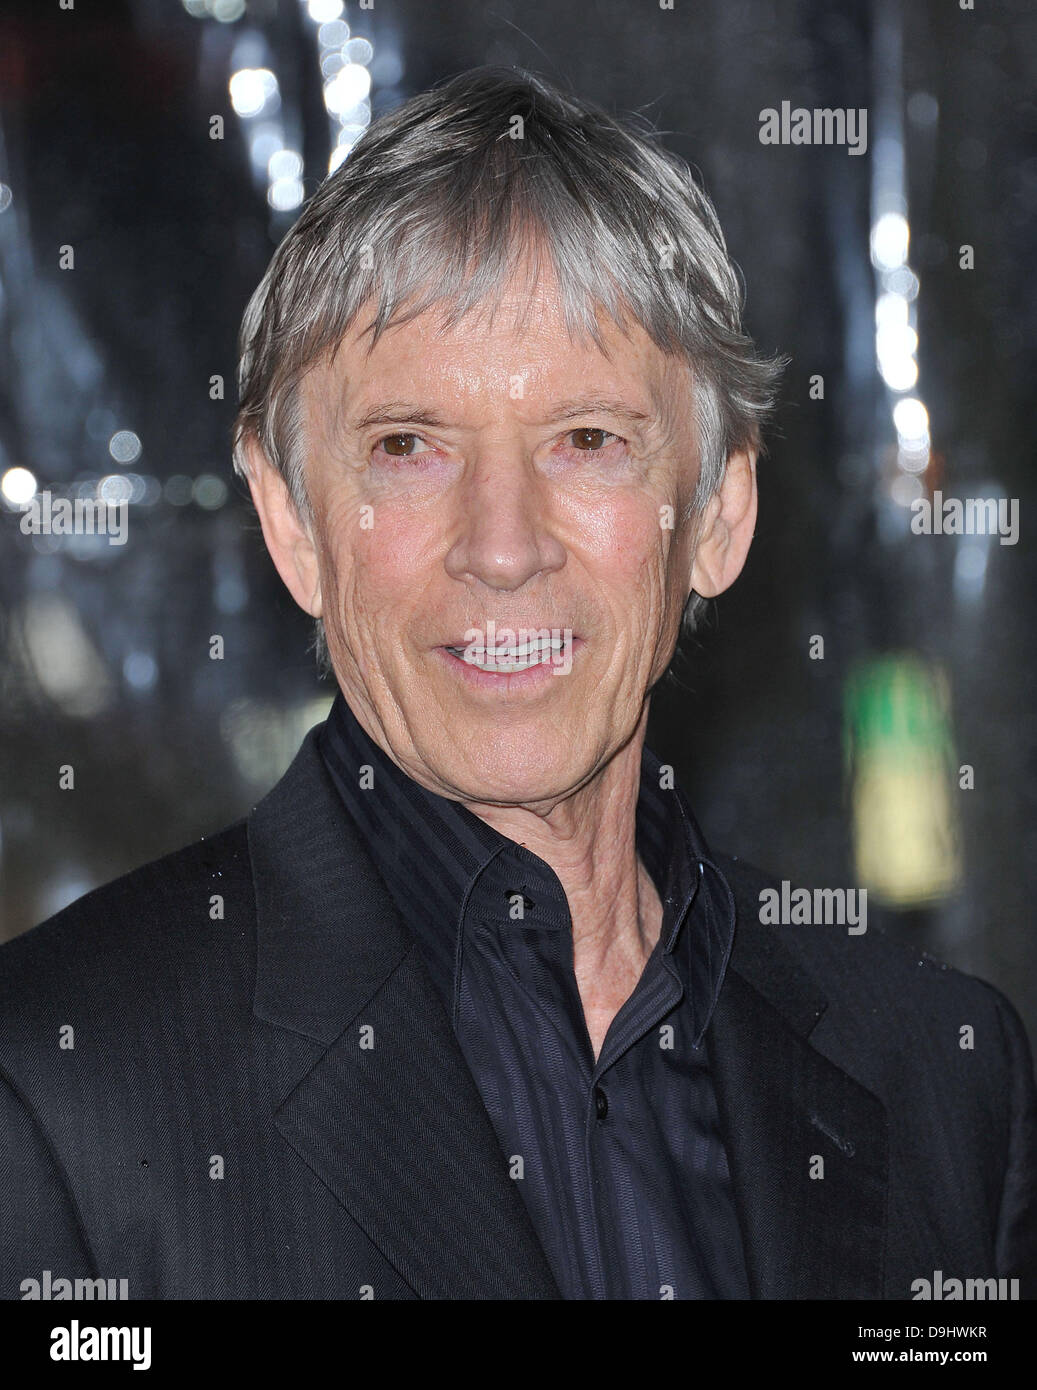 Scott Glenn Warner Bros. Pictures Los Angeles Premiere of 'Sucker Punch' held at the Grauman's Chinese Theatre Hollywood, California - 23.03.11 Stock Photo